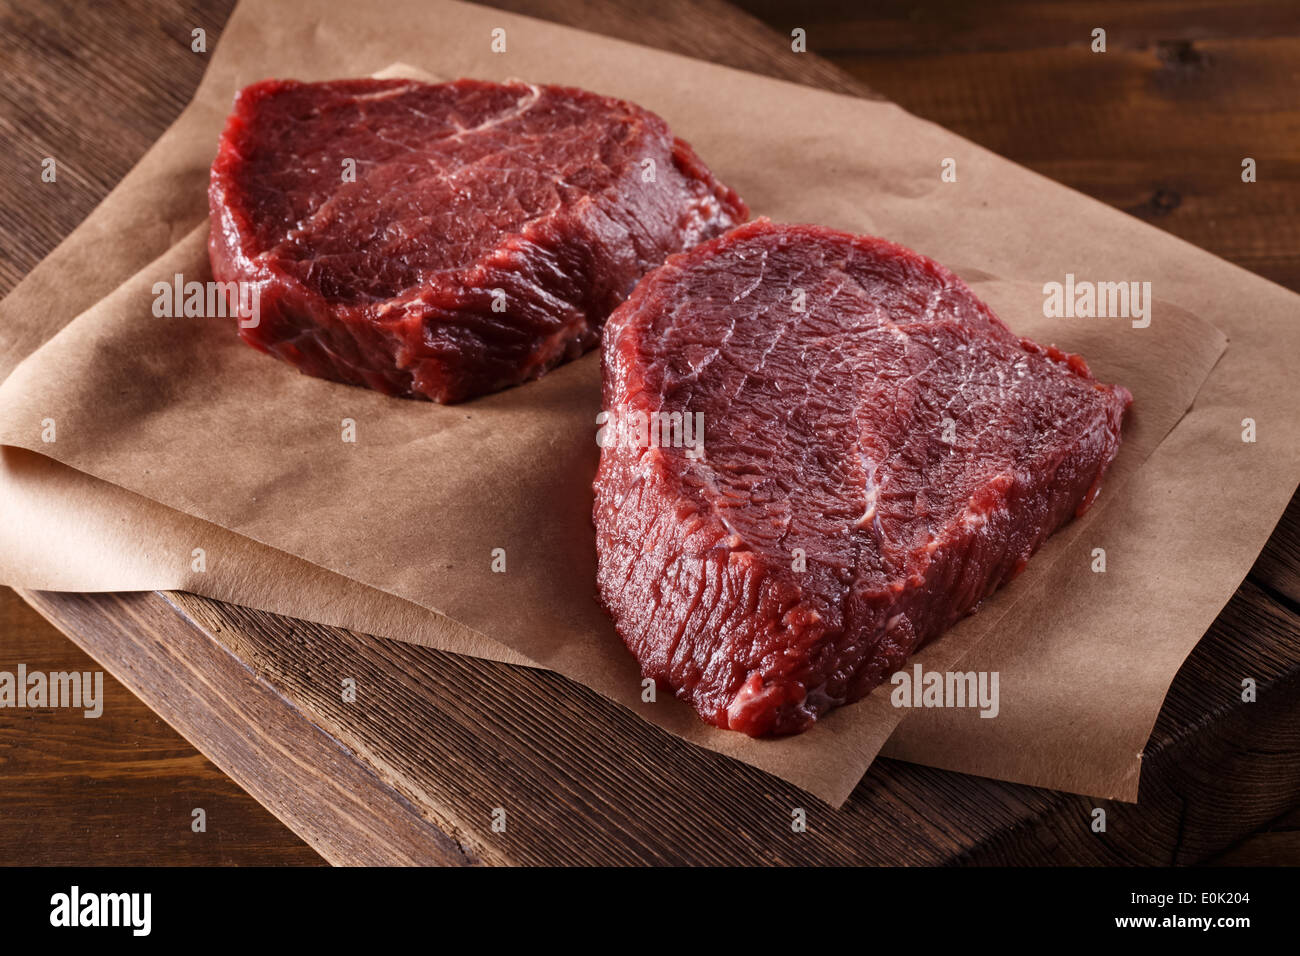 Succulent tender raw lean beef steaks lying on a sheet Stock Photo